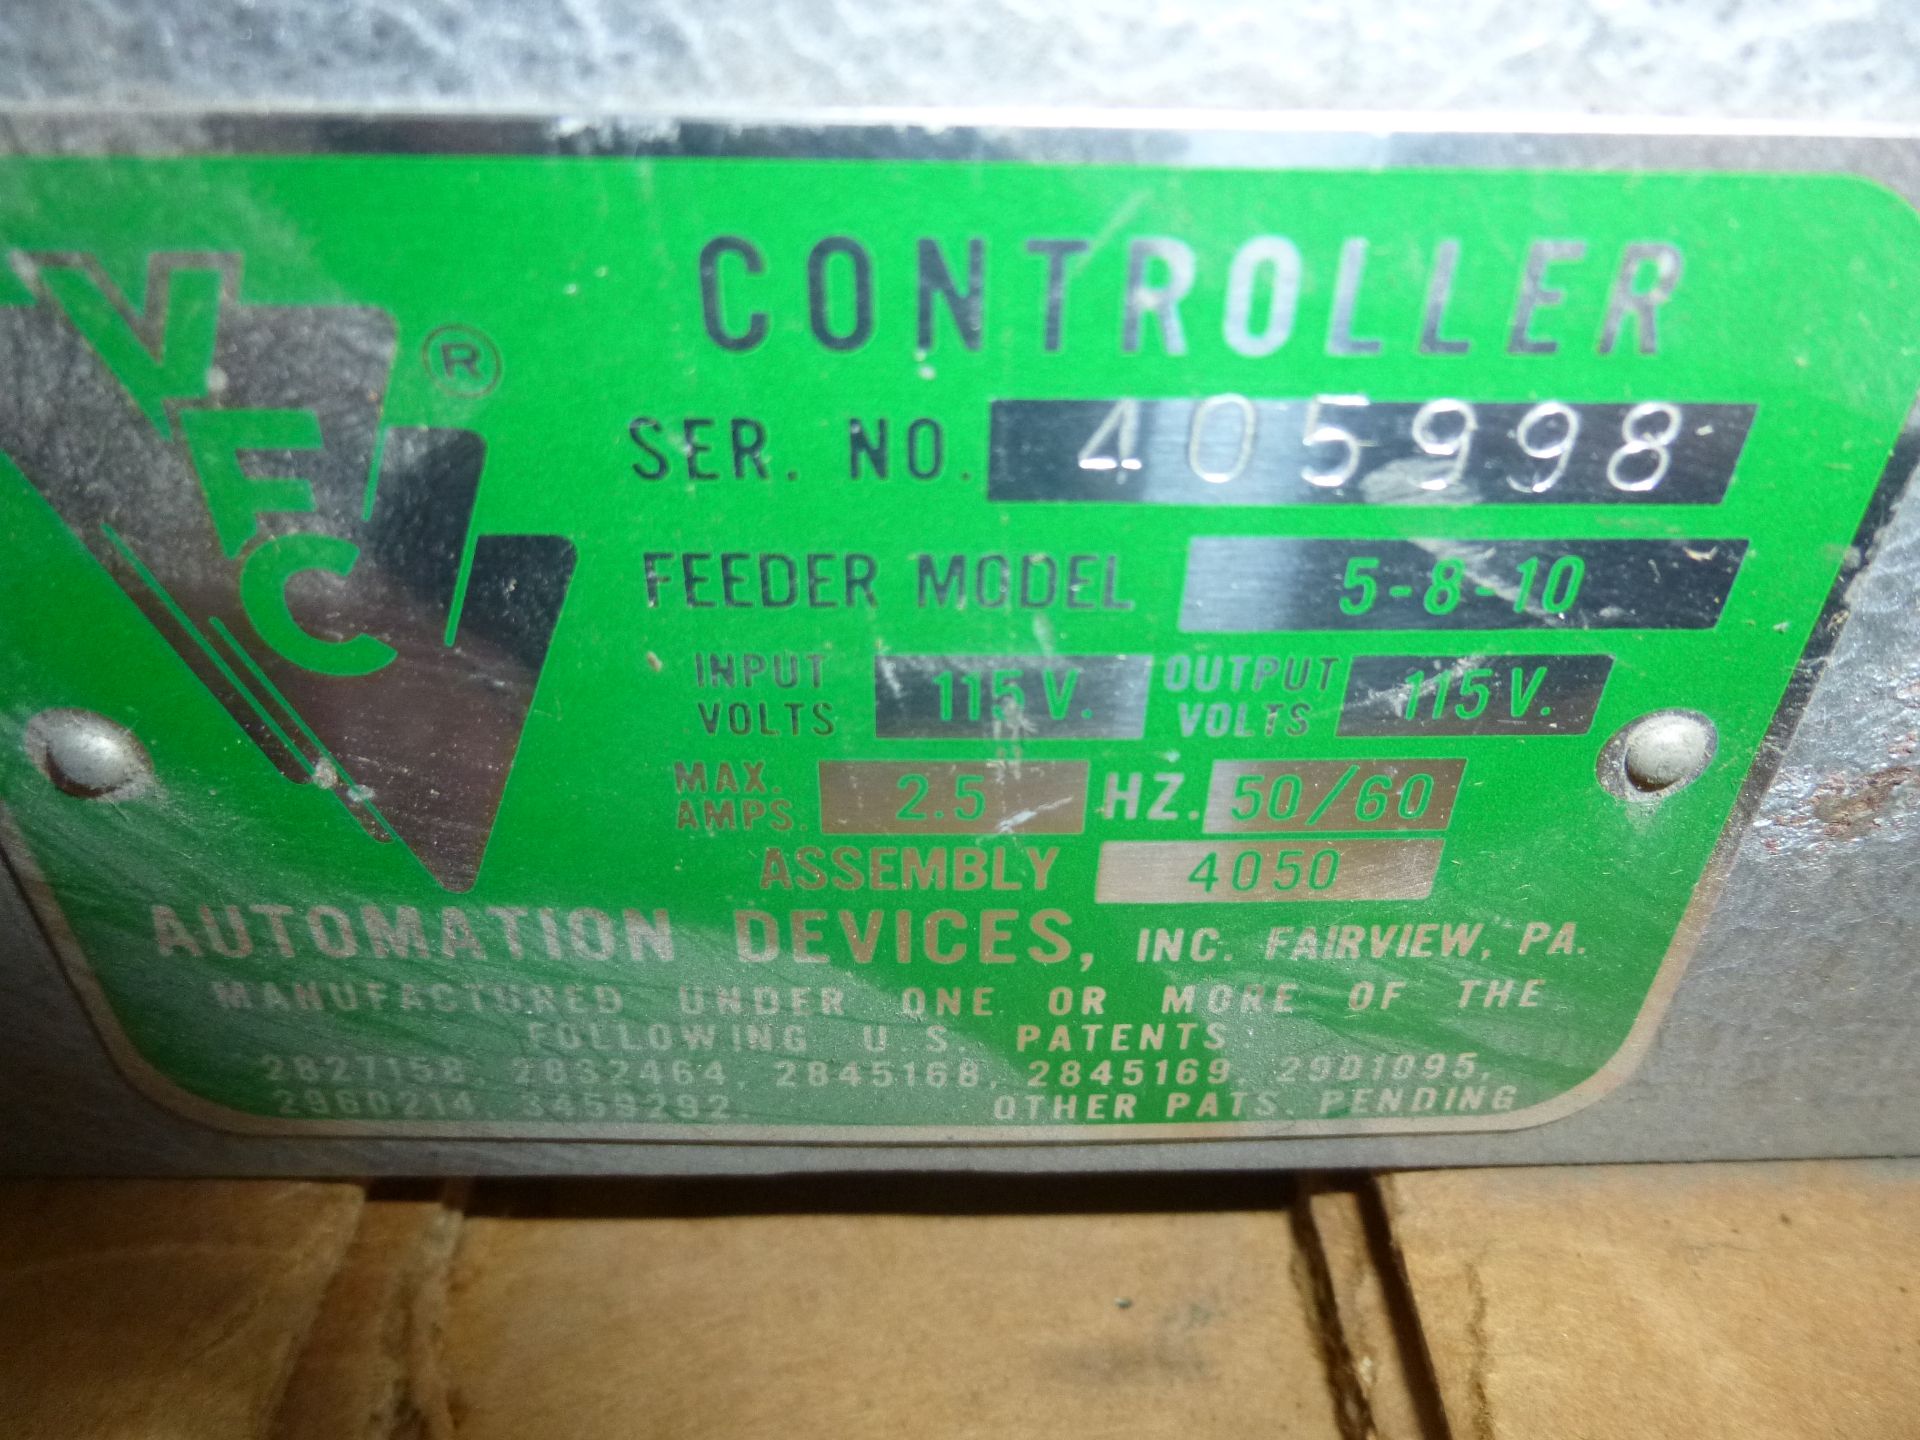 VFC controller for feeder, model 5-8-10, new in box, as always with Brolyn LLC auctions, all lots - Image 2 of 2